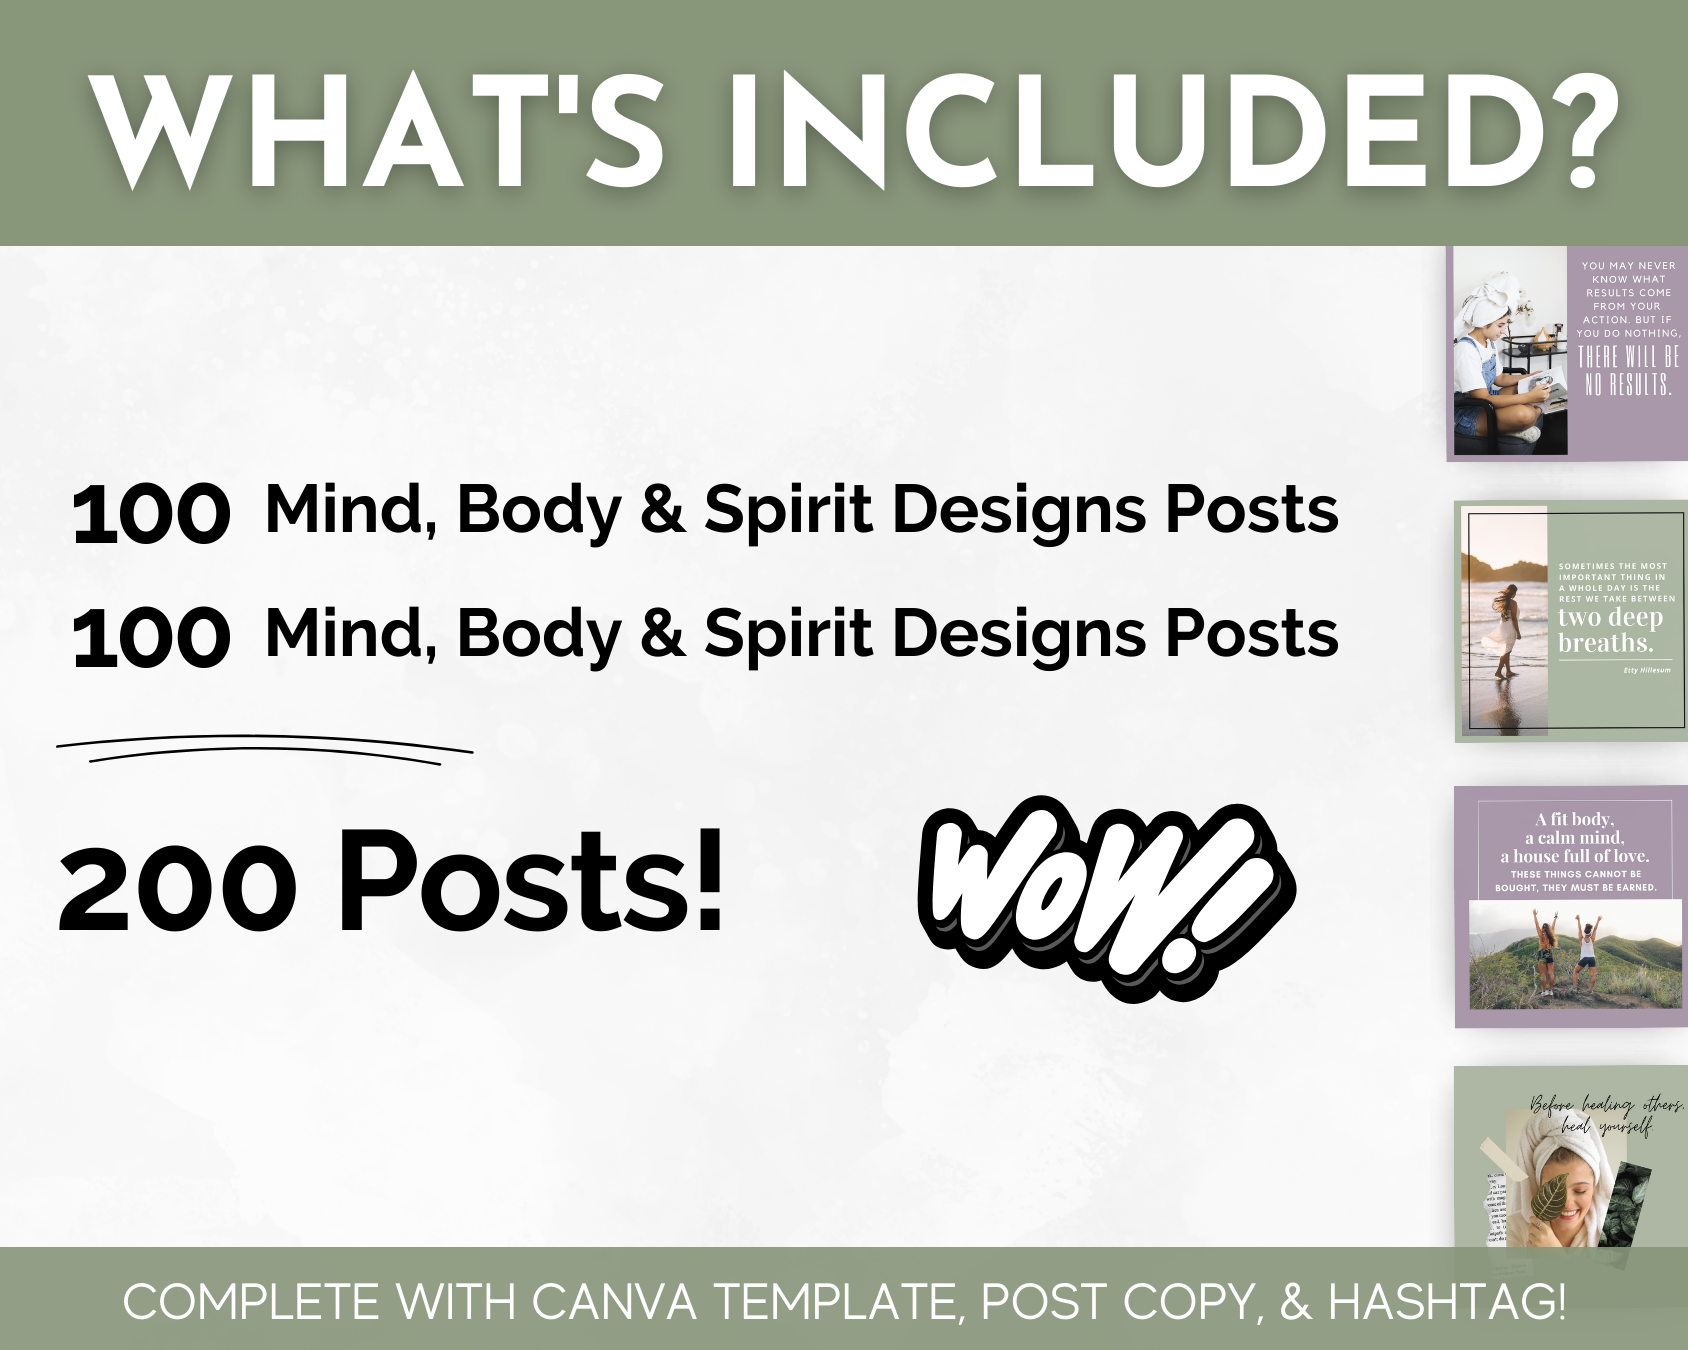 Digital content package advertisement for Socially Inclined's "Mind Body & Spirit Social Media Post Bundle" including Canva templates, post copy, and social media hashtags.